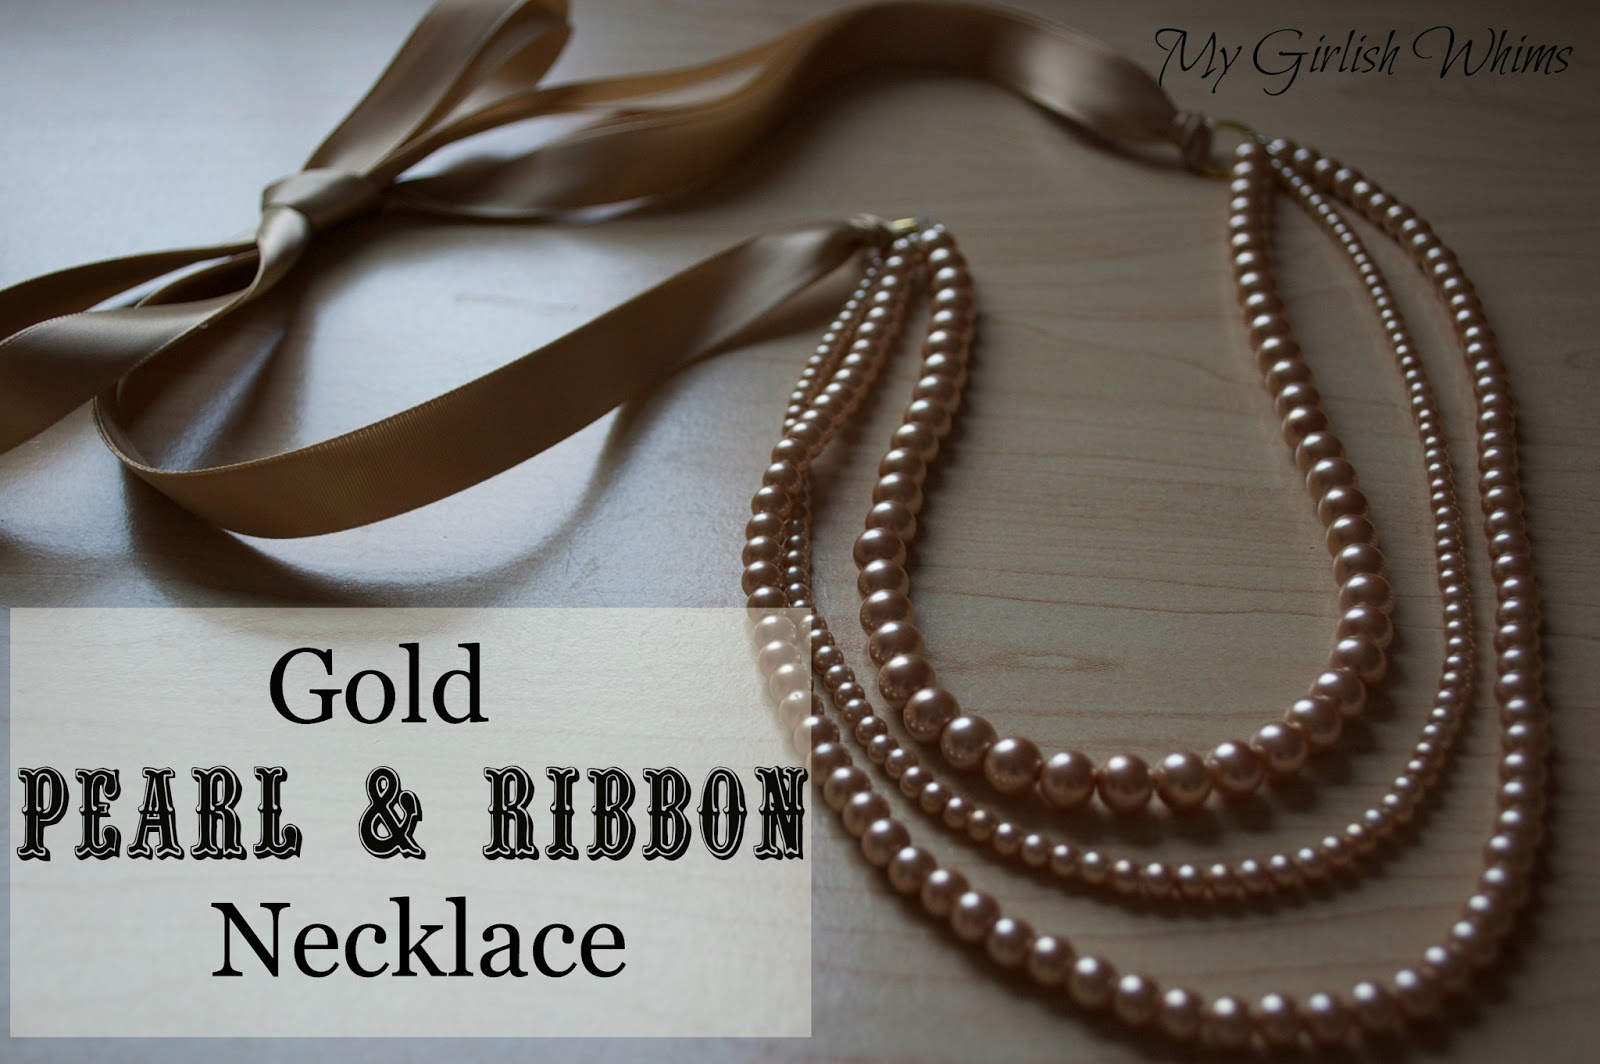 Silk ribbon necklaces: how to finish the ends - Rings and